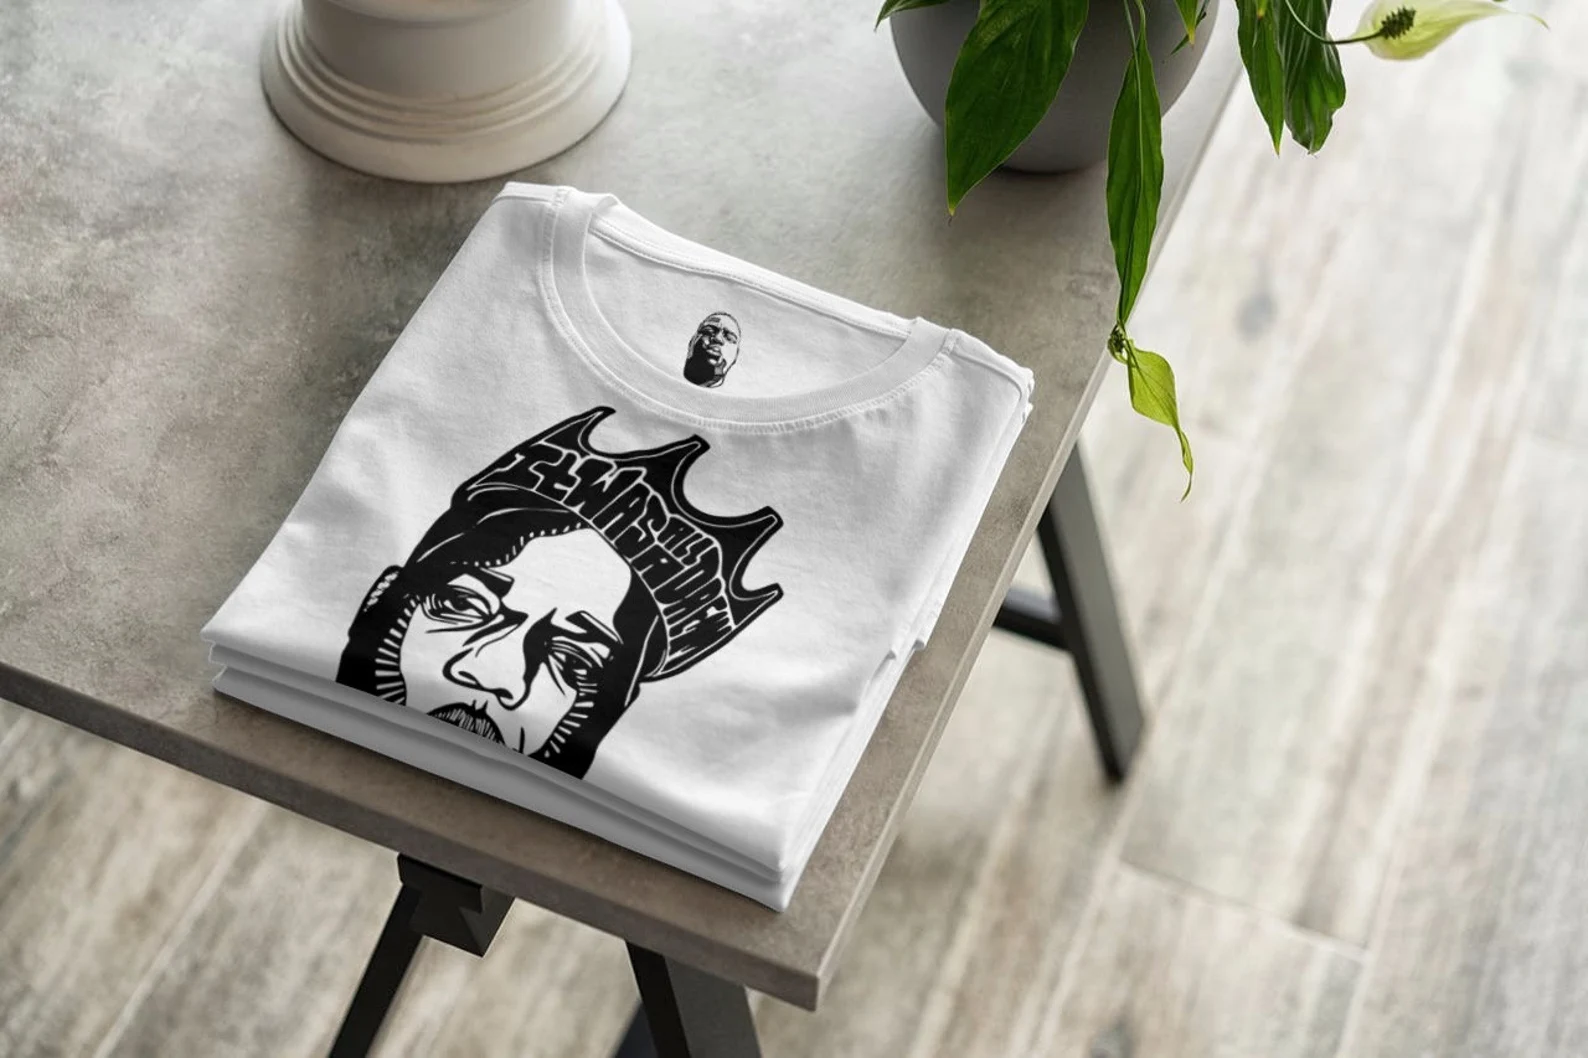 White t-shirt with an interesting Tupac illustration.